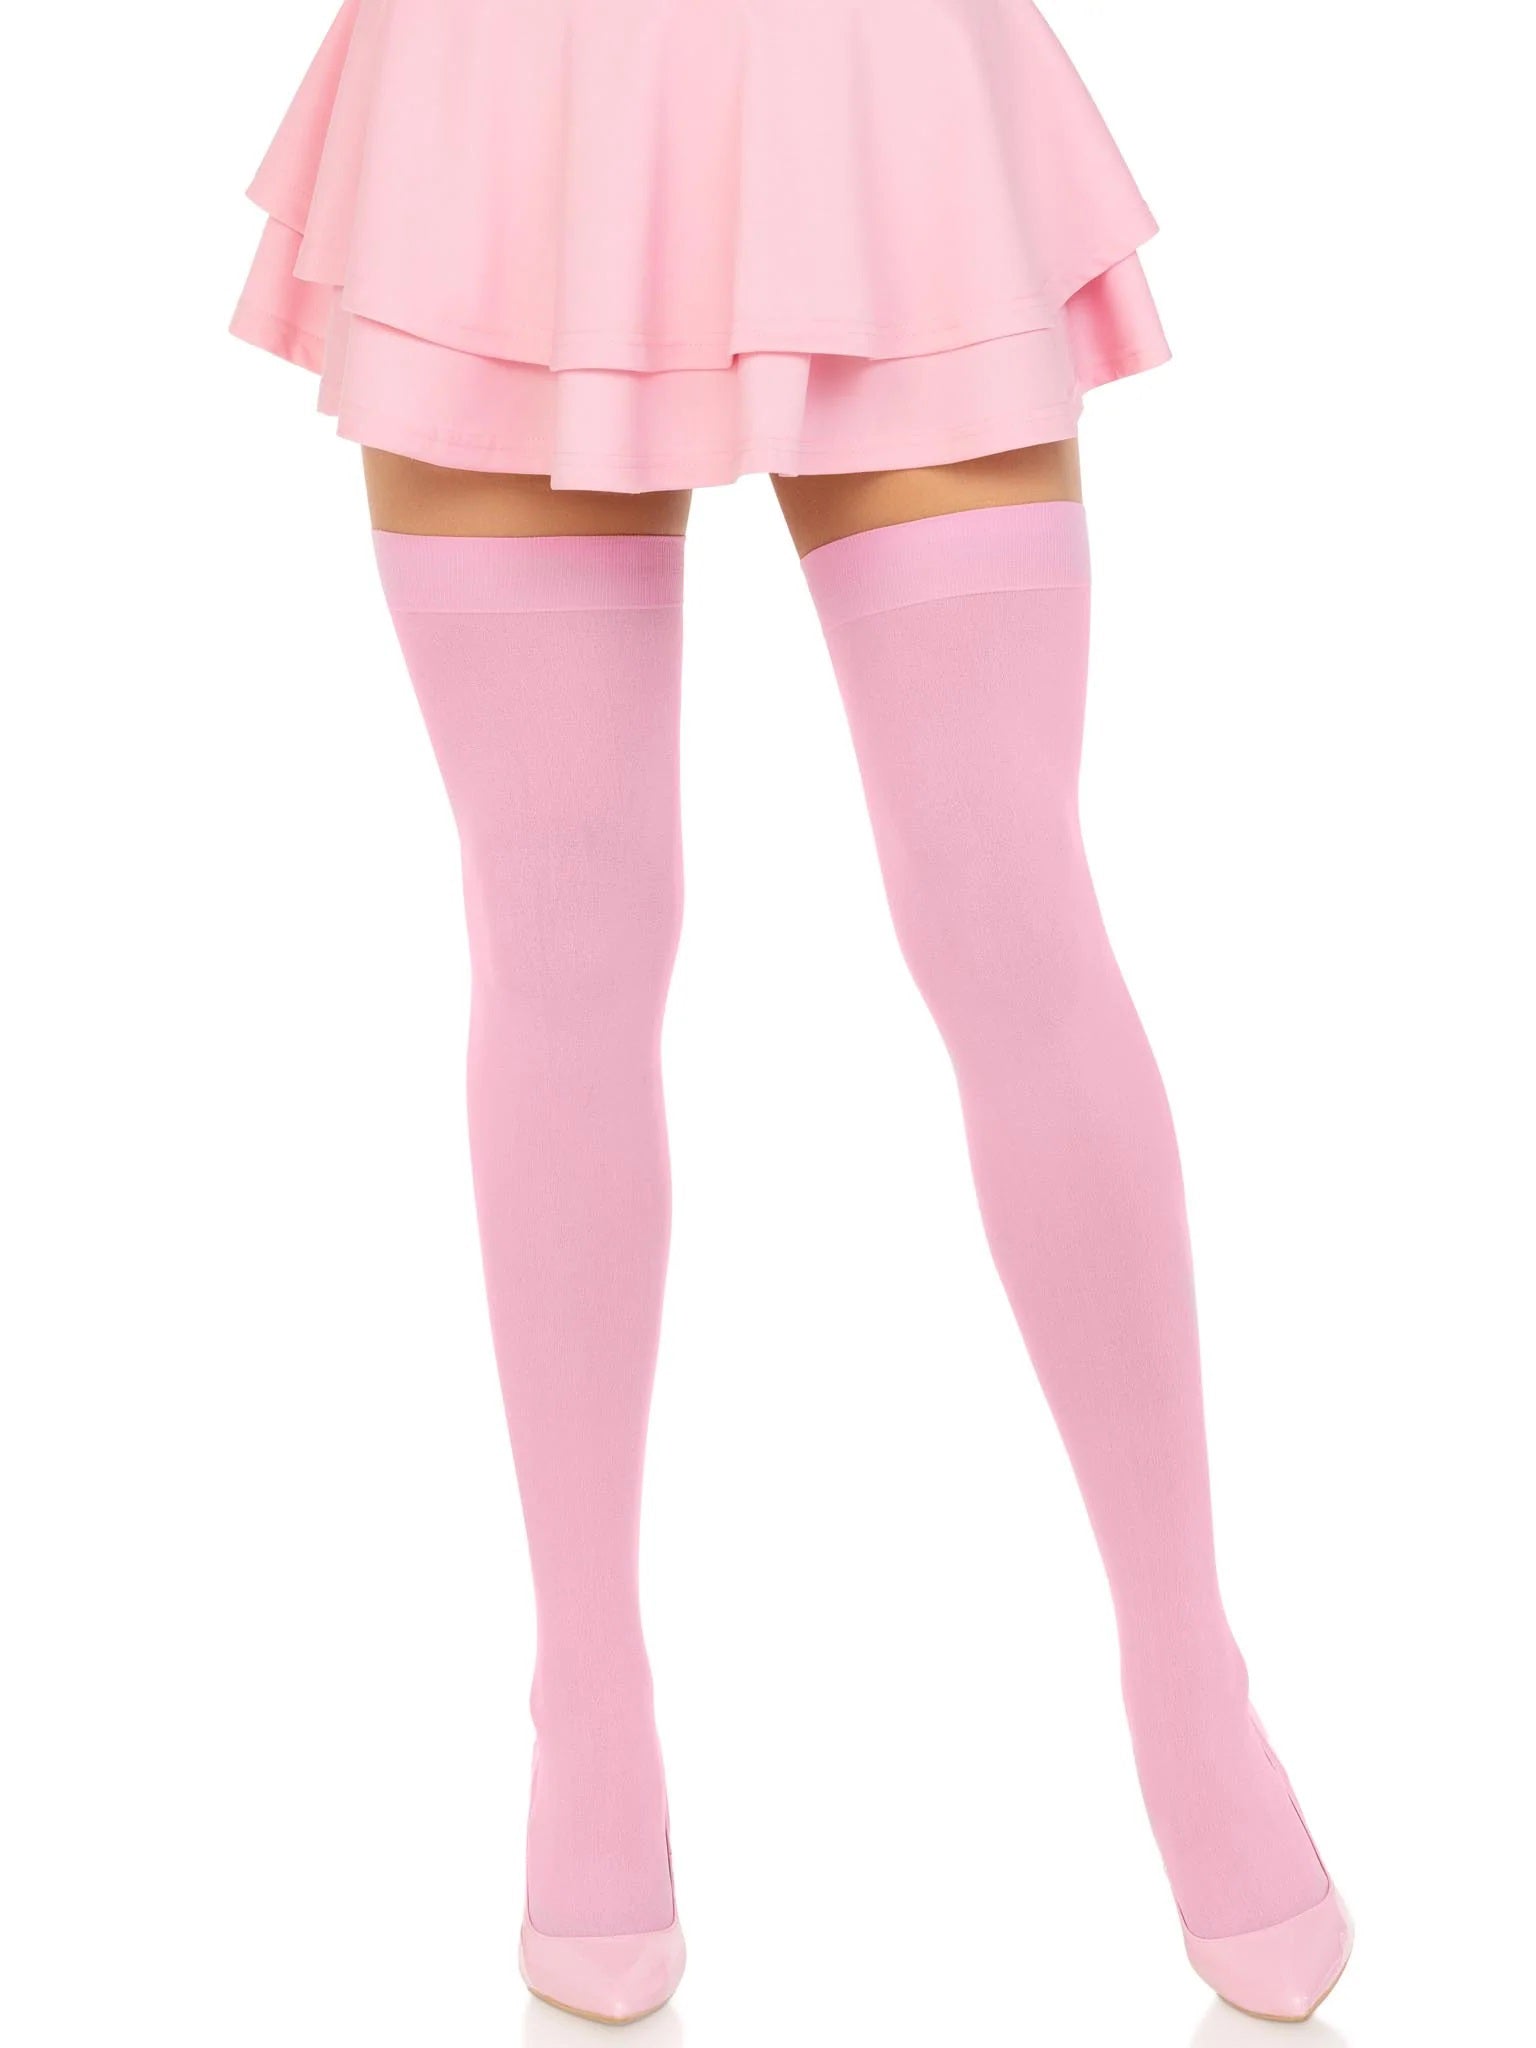 Opaque Nylon Thigh Highs - One Size - Pink-0